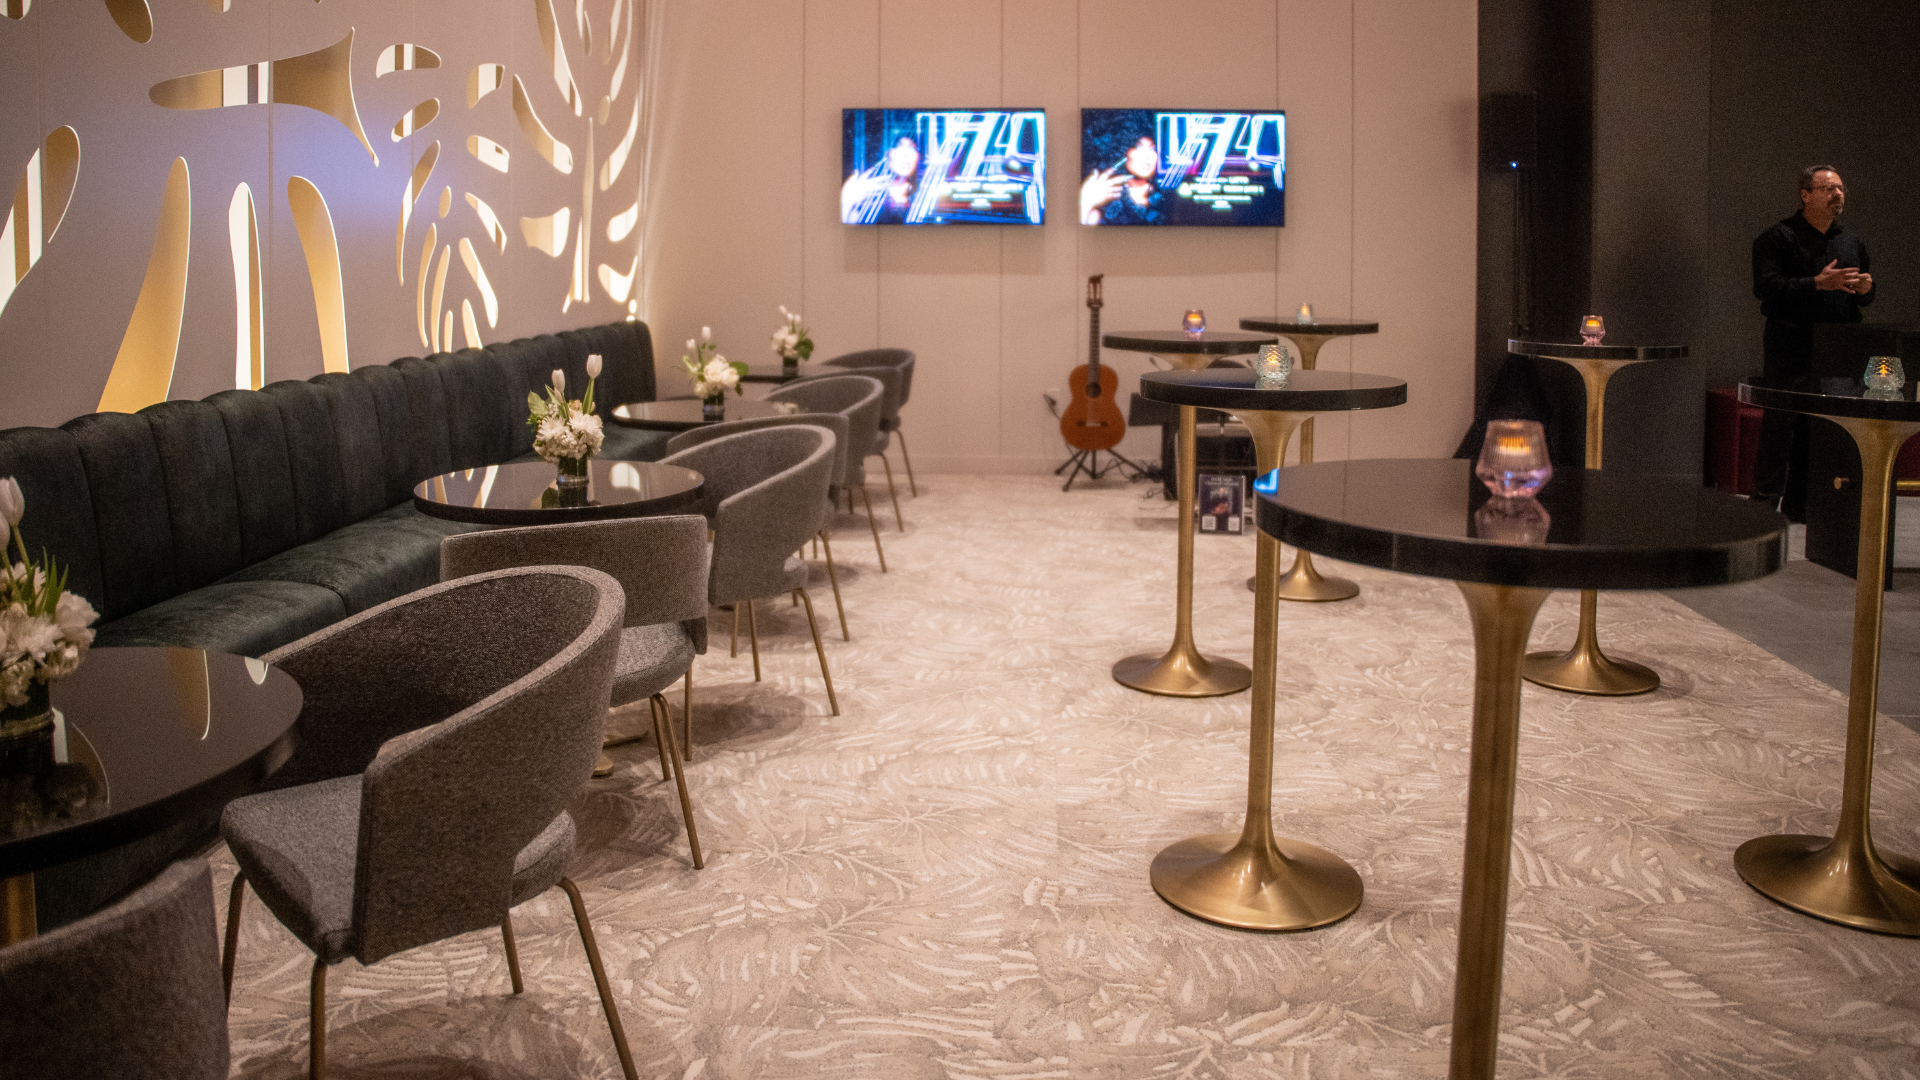 Chairmans Club 29 at Acrisure Arena is an exclusive, premiere speakeasy club